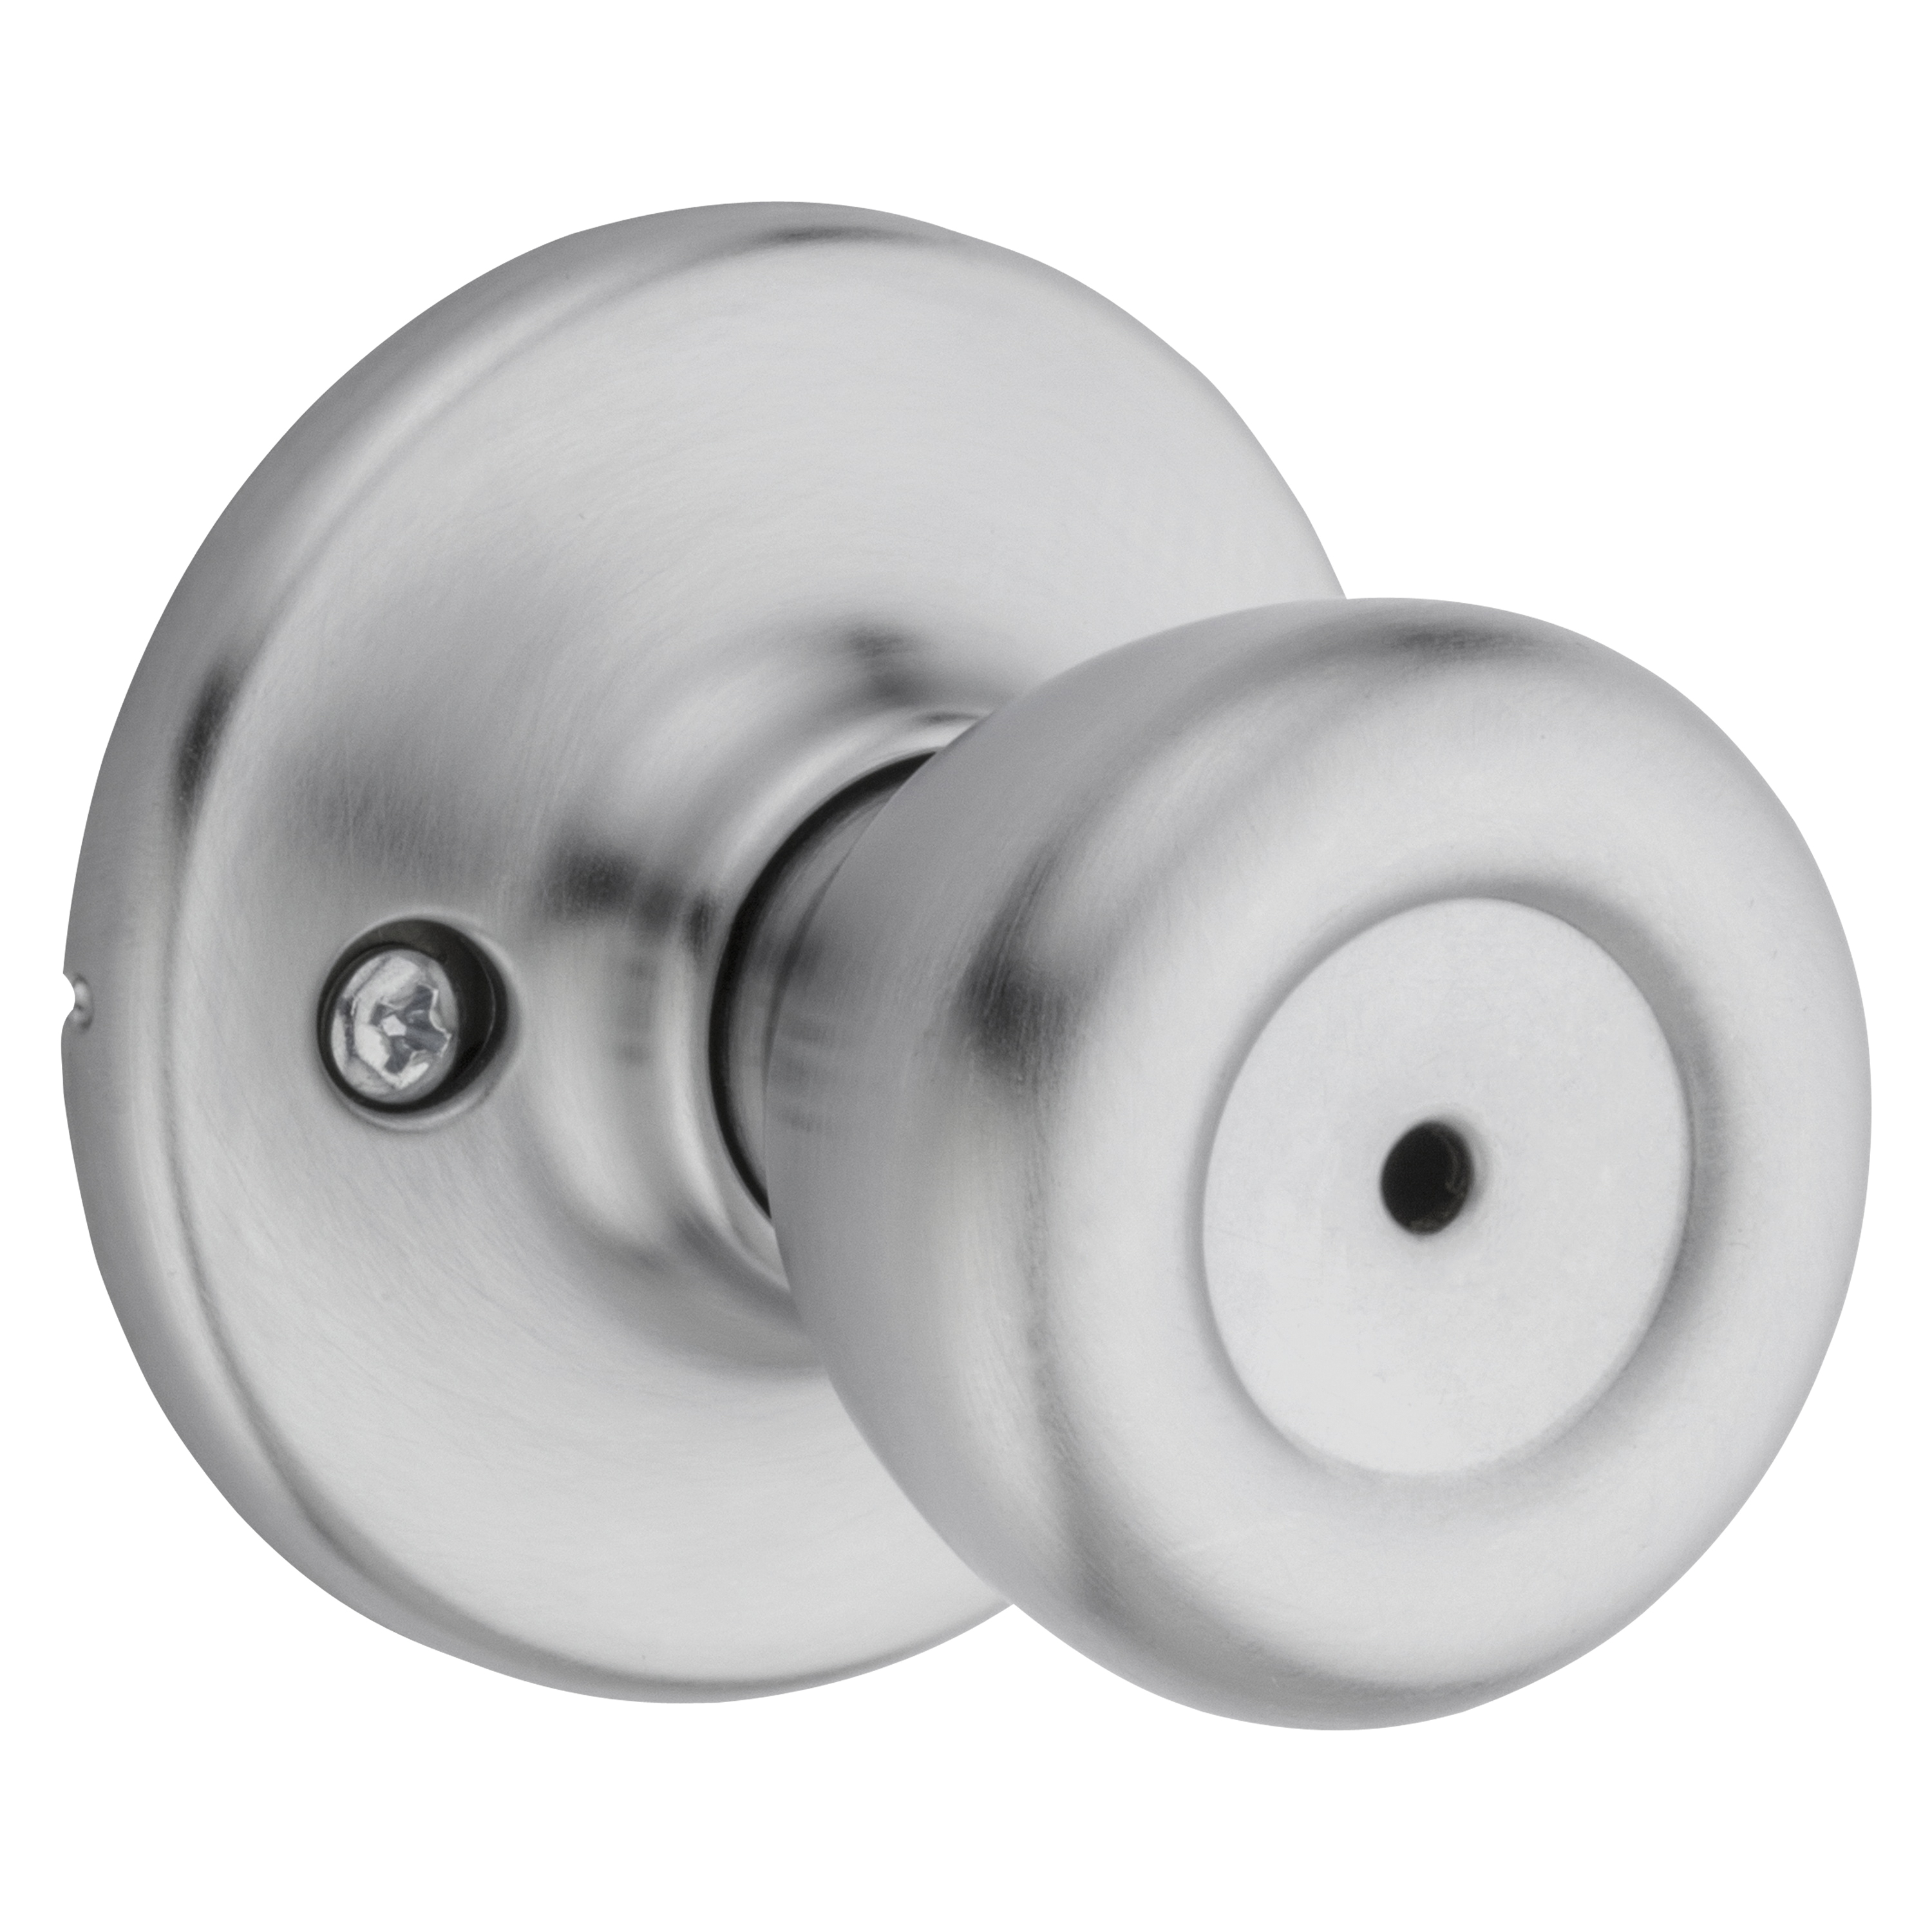 300T 26DCP Privacy Lockset, Satin Chrome, Universal Hand, For: Bedroom and Bathroom Doors